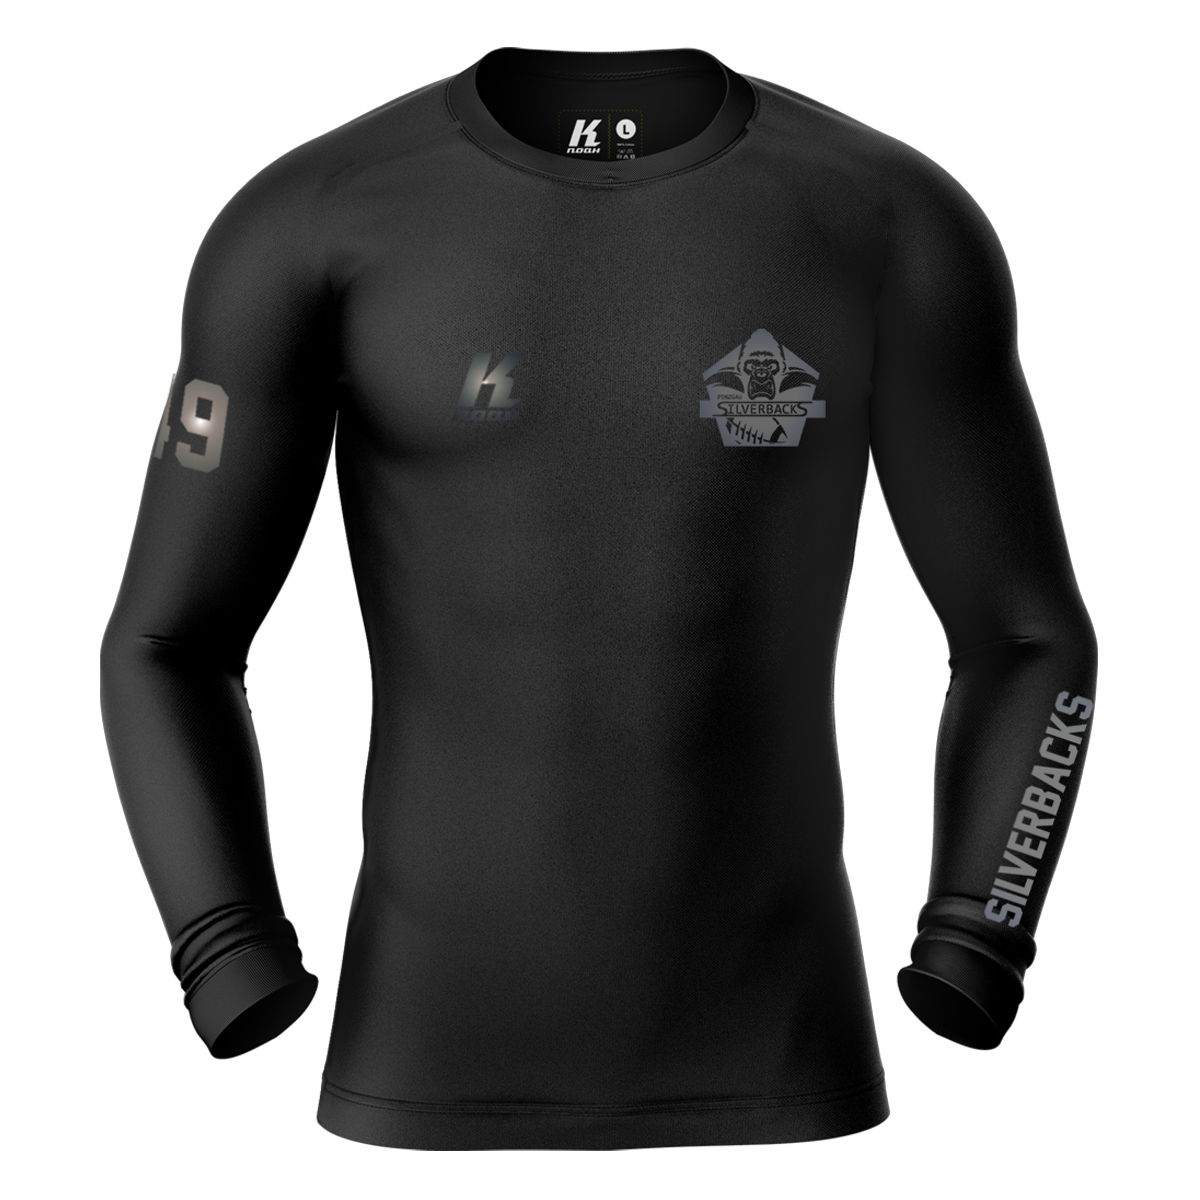 Silverbacks "Blackline" K.Tech Compression Longsleeve Shirt with Playernumber/Initials